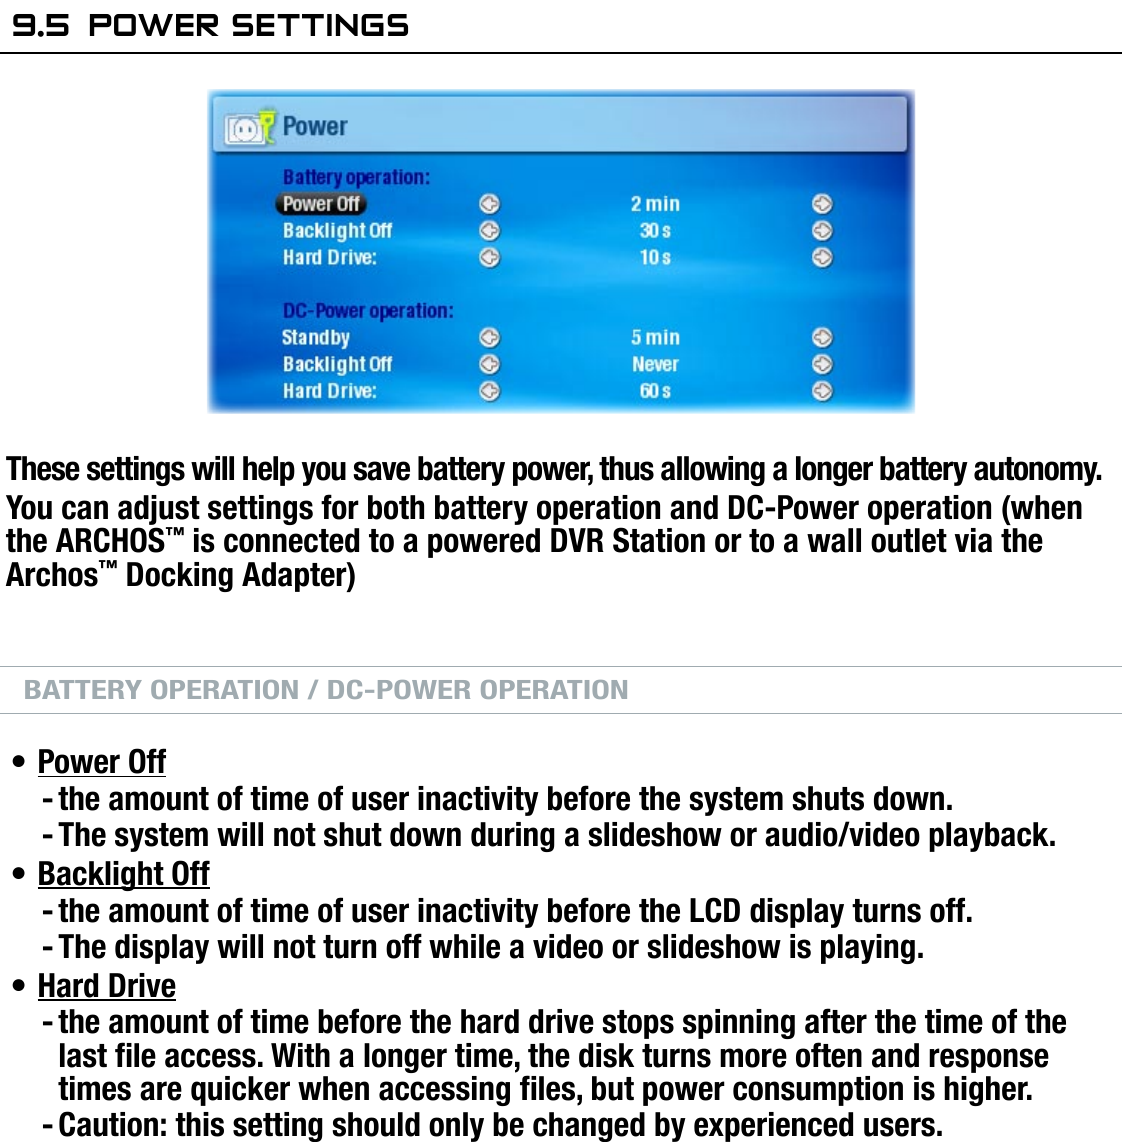 704MANUAL V0.0SETUP SCREEN   &gt;   p. 519.5  POwer seTTingsThese settings will help you save battery power, thus allowing a longer battery autonomy.You can adjust settings for both battery operation and DC-Power operation (when the ARCHOS™ is connected to a powered DVR Station or to a wall outlet via the Archos™ Docking Adapter)BATTERY OPERATION / DC-POWER OPERATIONPower Offthe amount of time of user inactivity before the system shuts down.The system will not shut down during a slideshow or audio/video playback.Backlight Offthe amount of time of user inactivity before the LCD display turns off.The display will not turn off while a video or slideshow is playing.Hard Drivethe amount of time before the hard drive stops spinning after the time of the last le access. With a longer time, the disk turns more often and response times are quicker when accessing les, but power consumption is higher.Caution: this setting should only be changed by experienced users.Your ARCHOS™ device  will  consume  more power as these parameters  are  set  to higher values (the backlight and hard drive in particular consume much power).When in battery mode, it is advised to set these parameters to lower values in order to save power.Your device will be hotter when the backlight and hard drive are on for long periods of time.•--•--•--•••